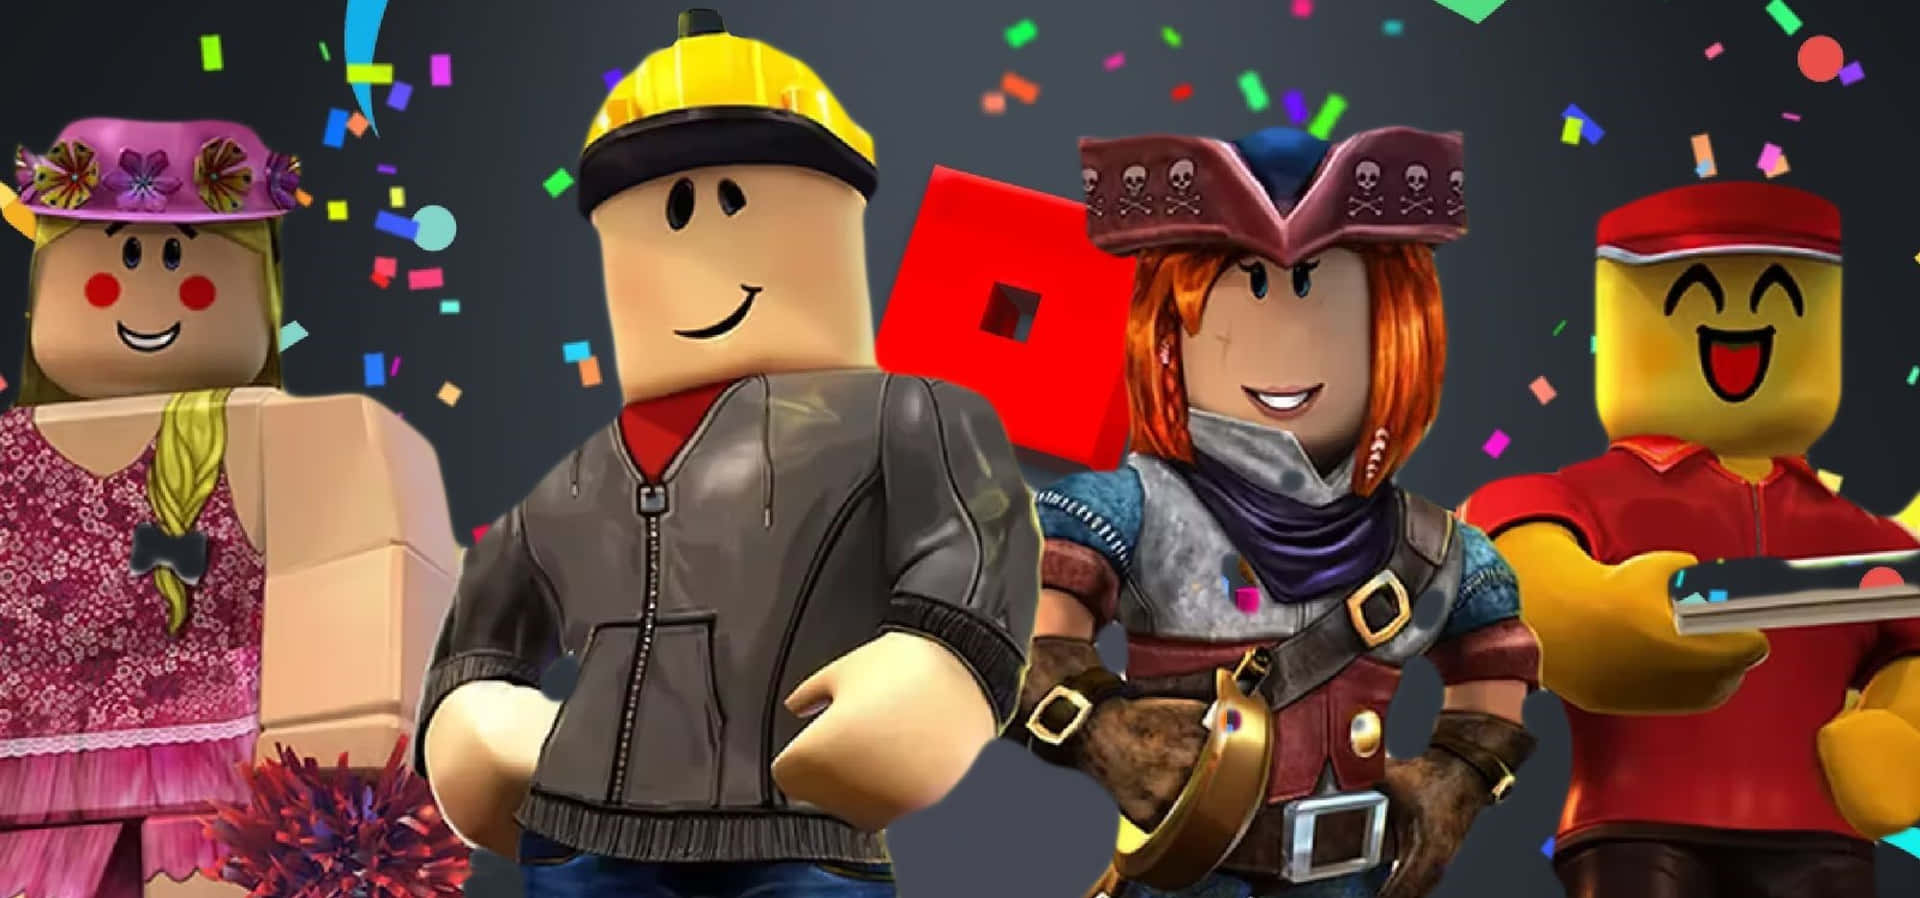 Download Cool Roblox Pictures | Wallpapers.com